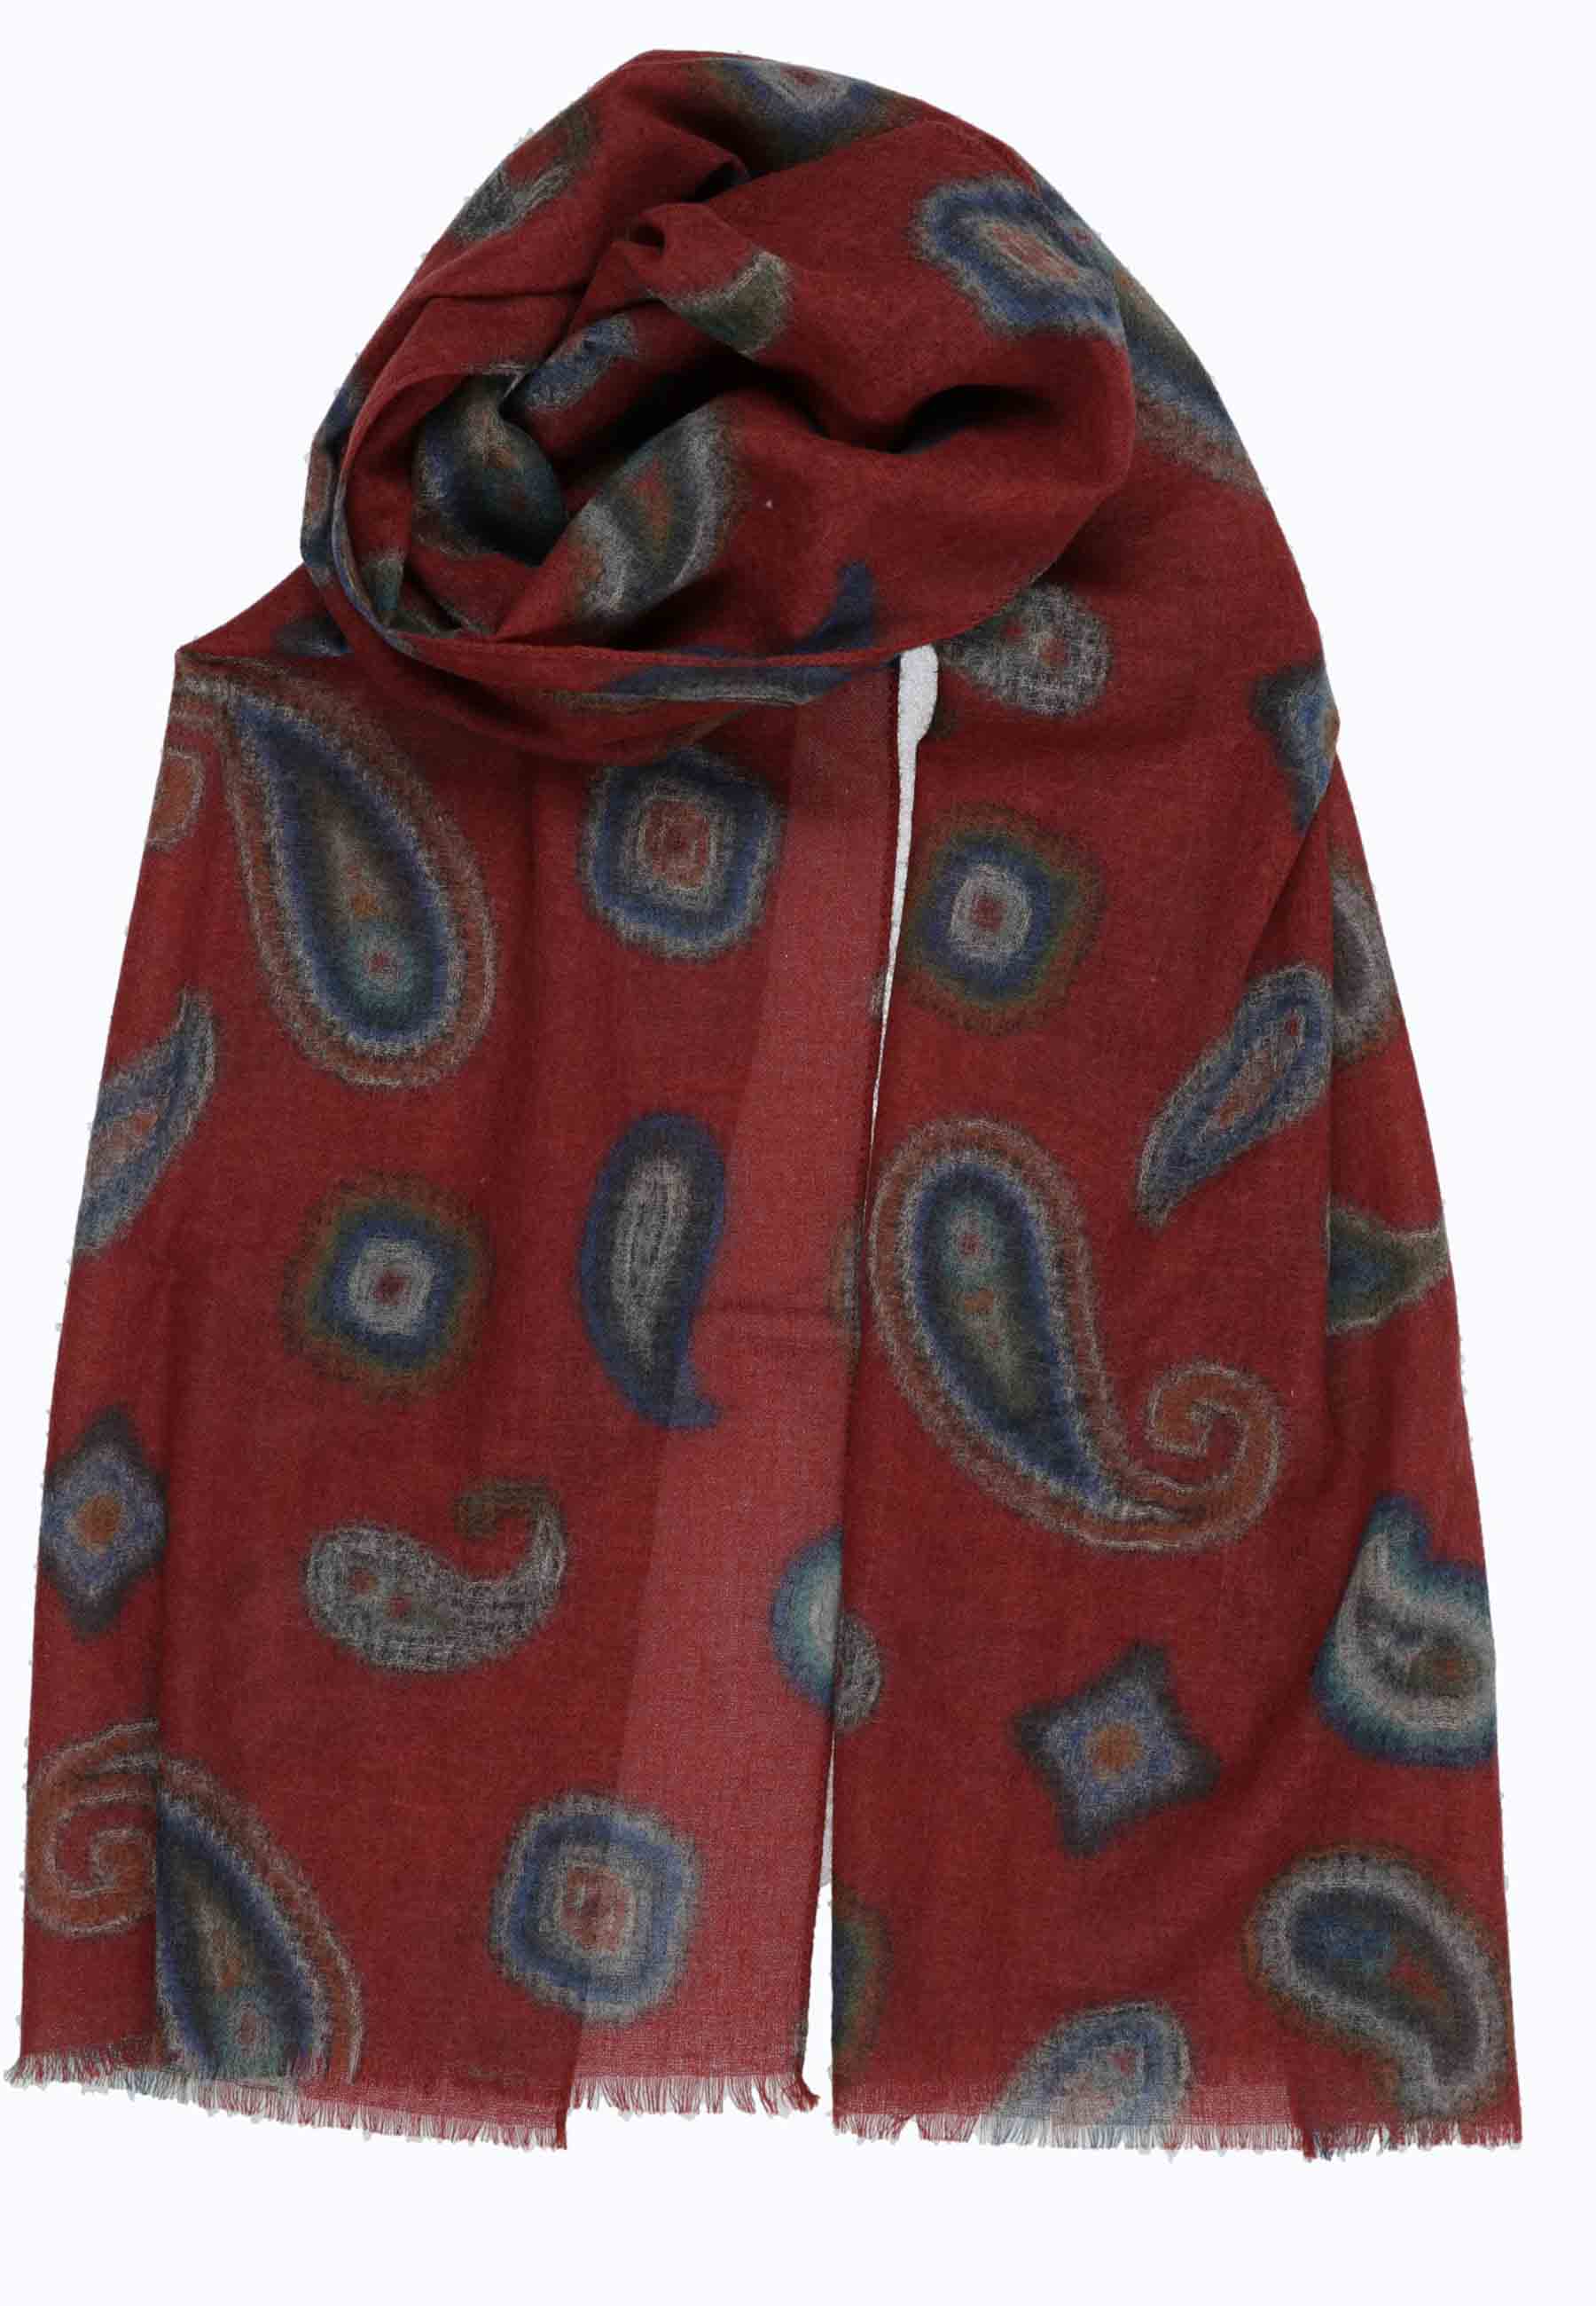 Burgundy wool scarves with cashmere pattern